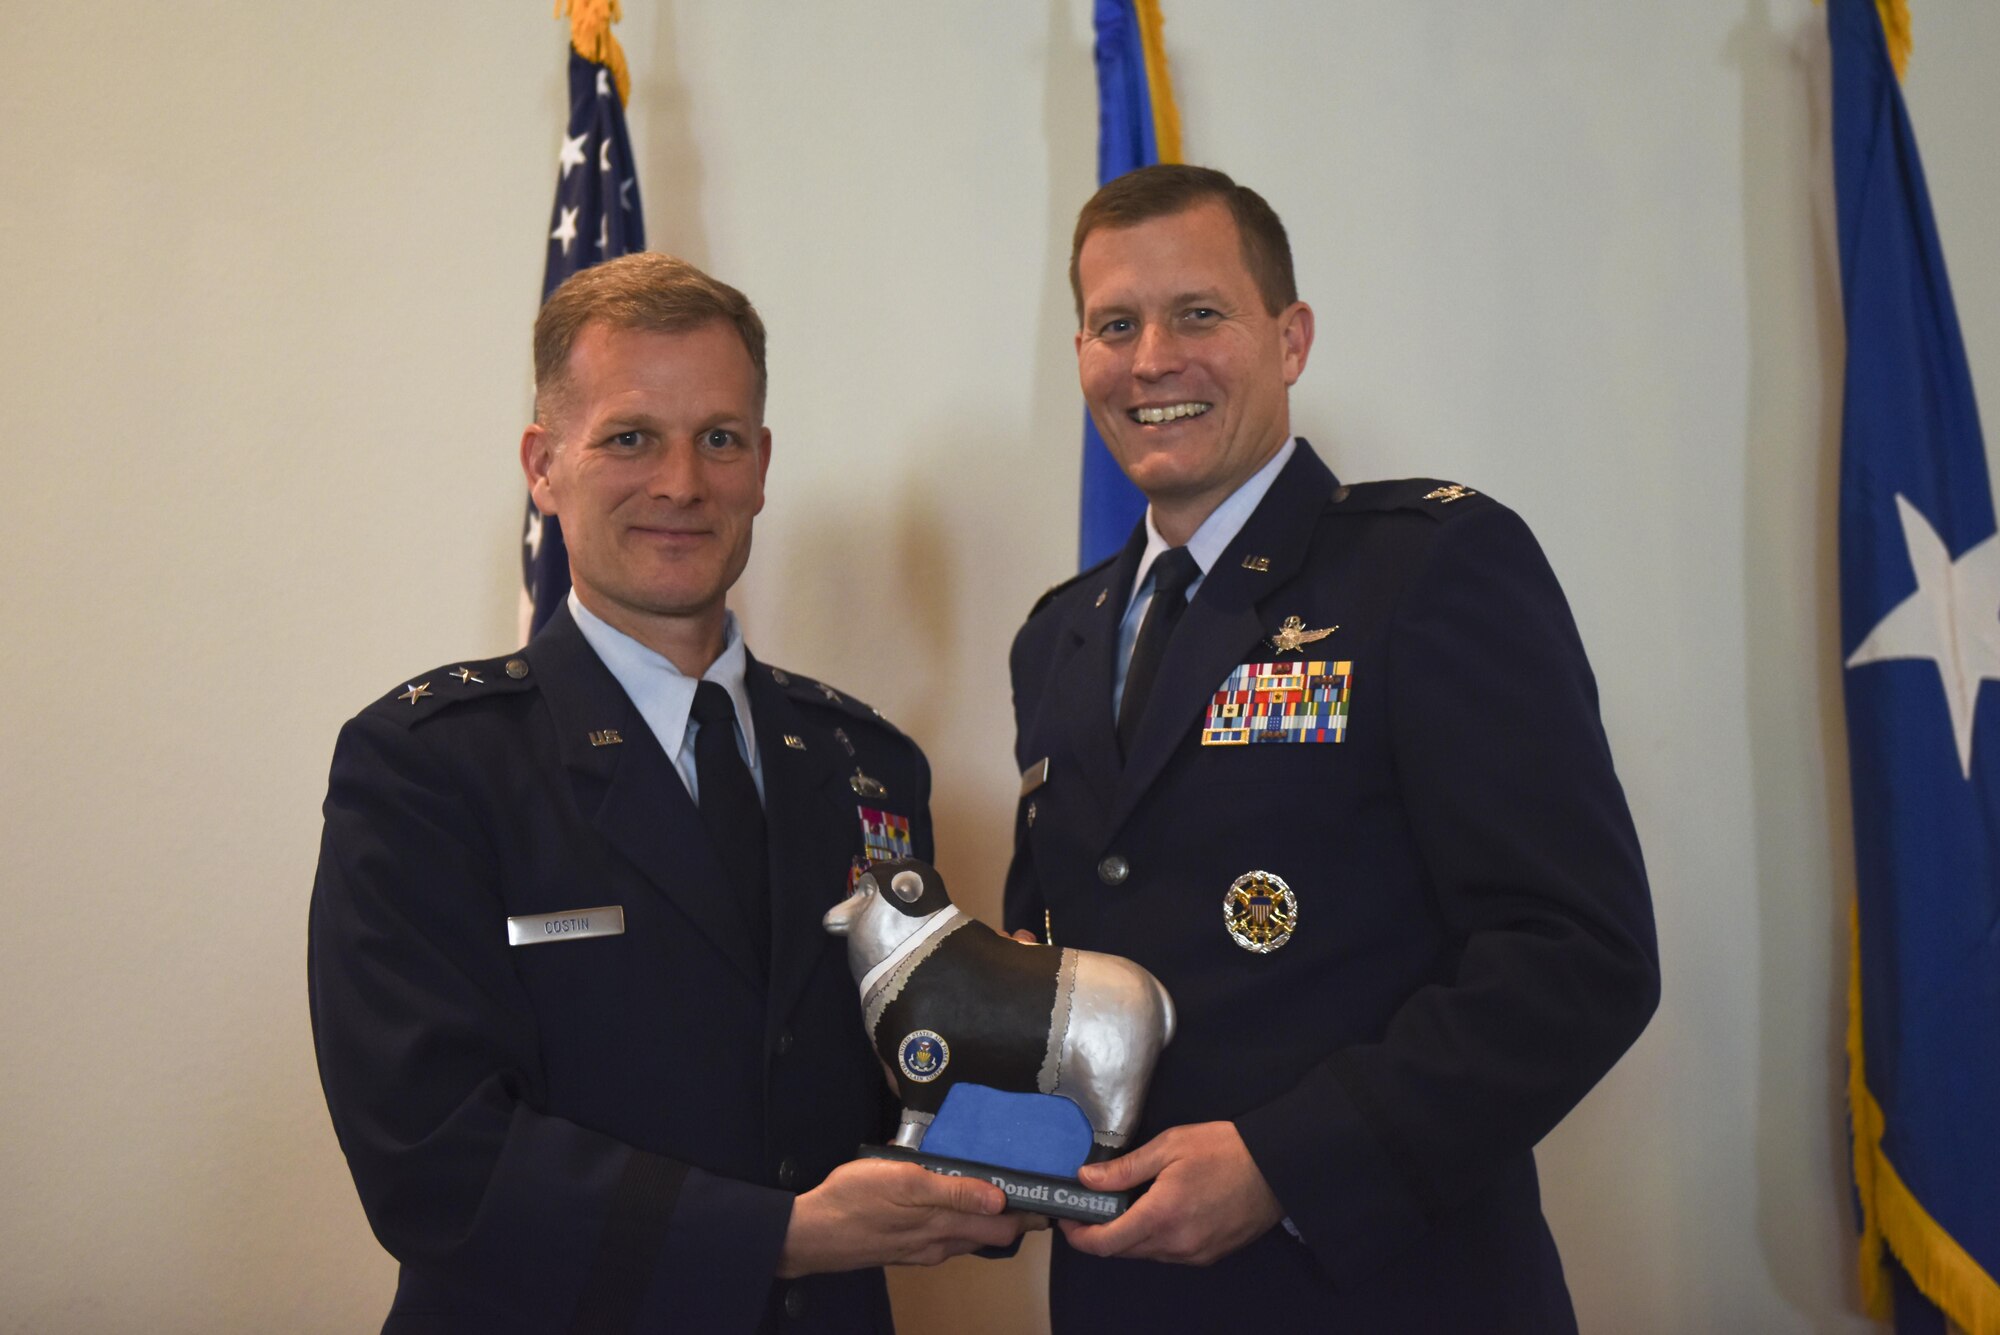 U.S. Air Force Col. Jeffrey Sorrell, 17th Training Wing Vice Commander, presents Chaplain (Maj. Gen.) Dondi Costin, Air Force Chief of Chaplains, with a miniature sheep at the Event Center on Goodfellow Air Force Base, Texas, March 15, 2017. The sheep represents the Doolittle Raiders and the local community’s main livestock. (U.S. Air Force photo by Airman 1st Class Chase Sousa/Released)